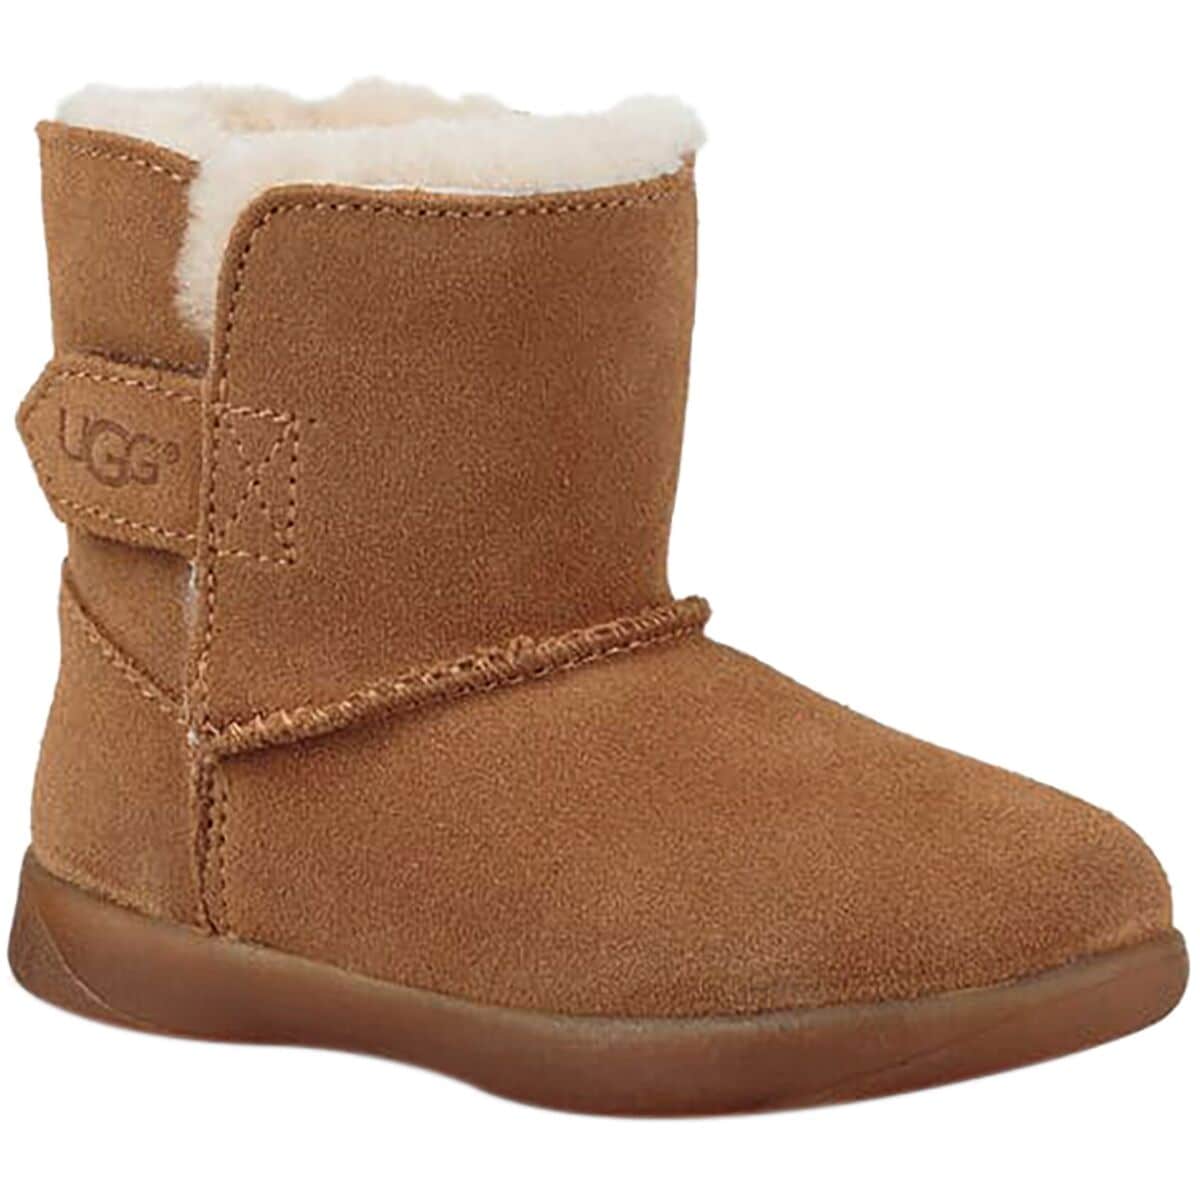 ugg boots size 4